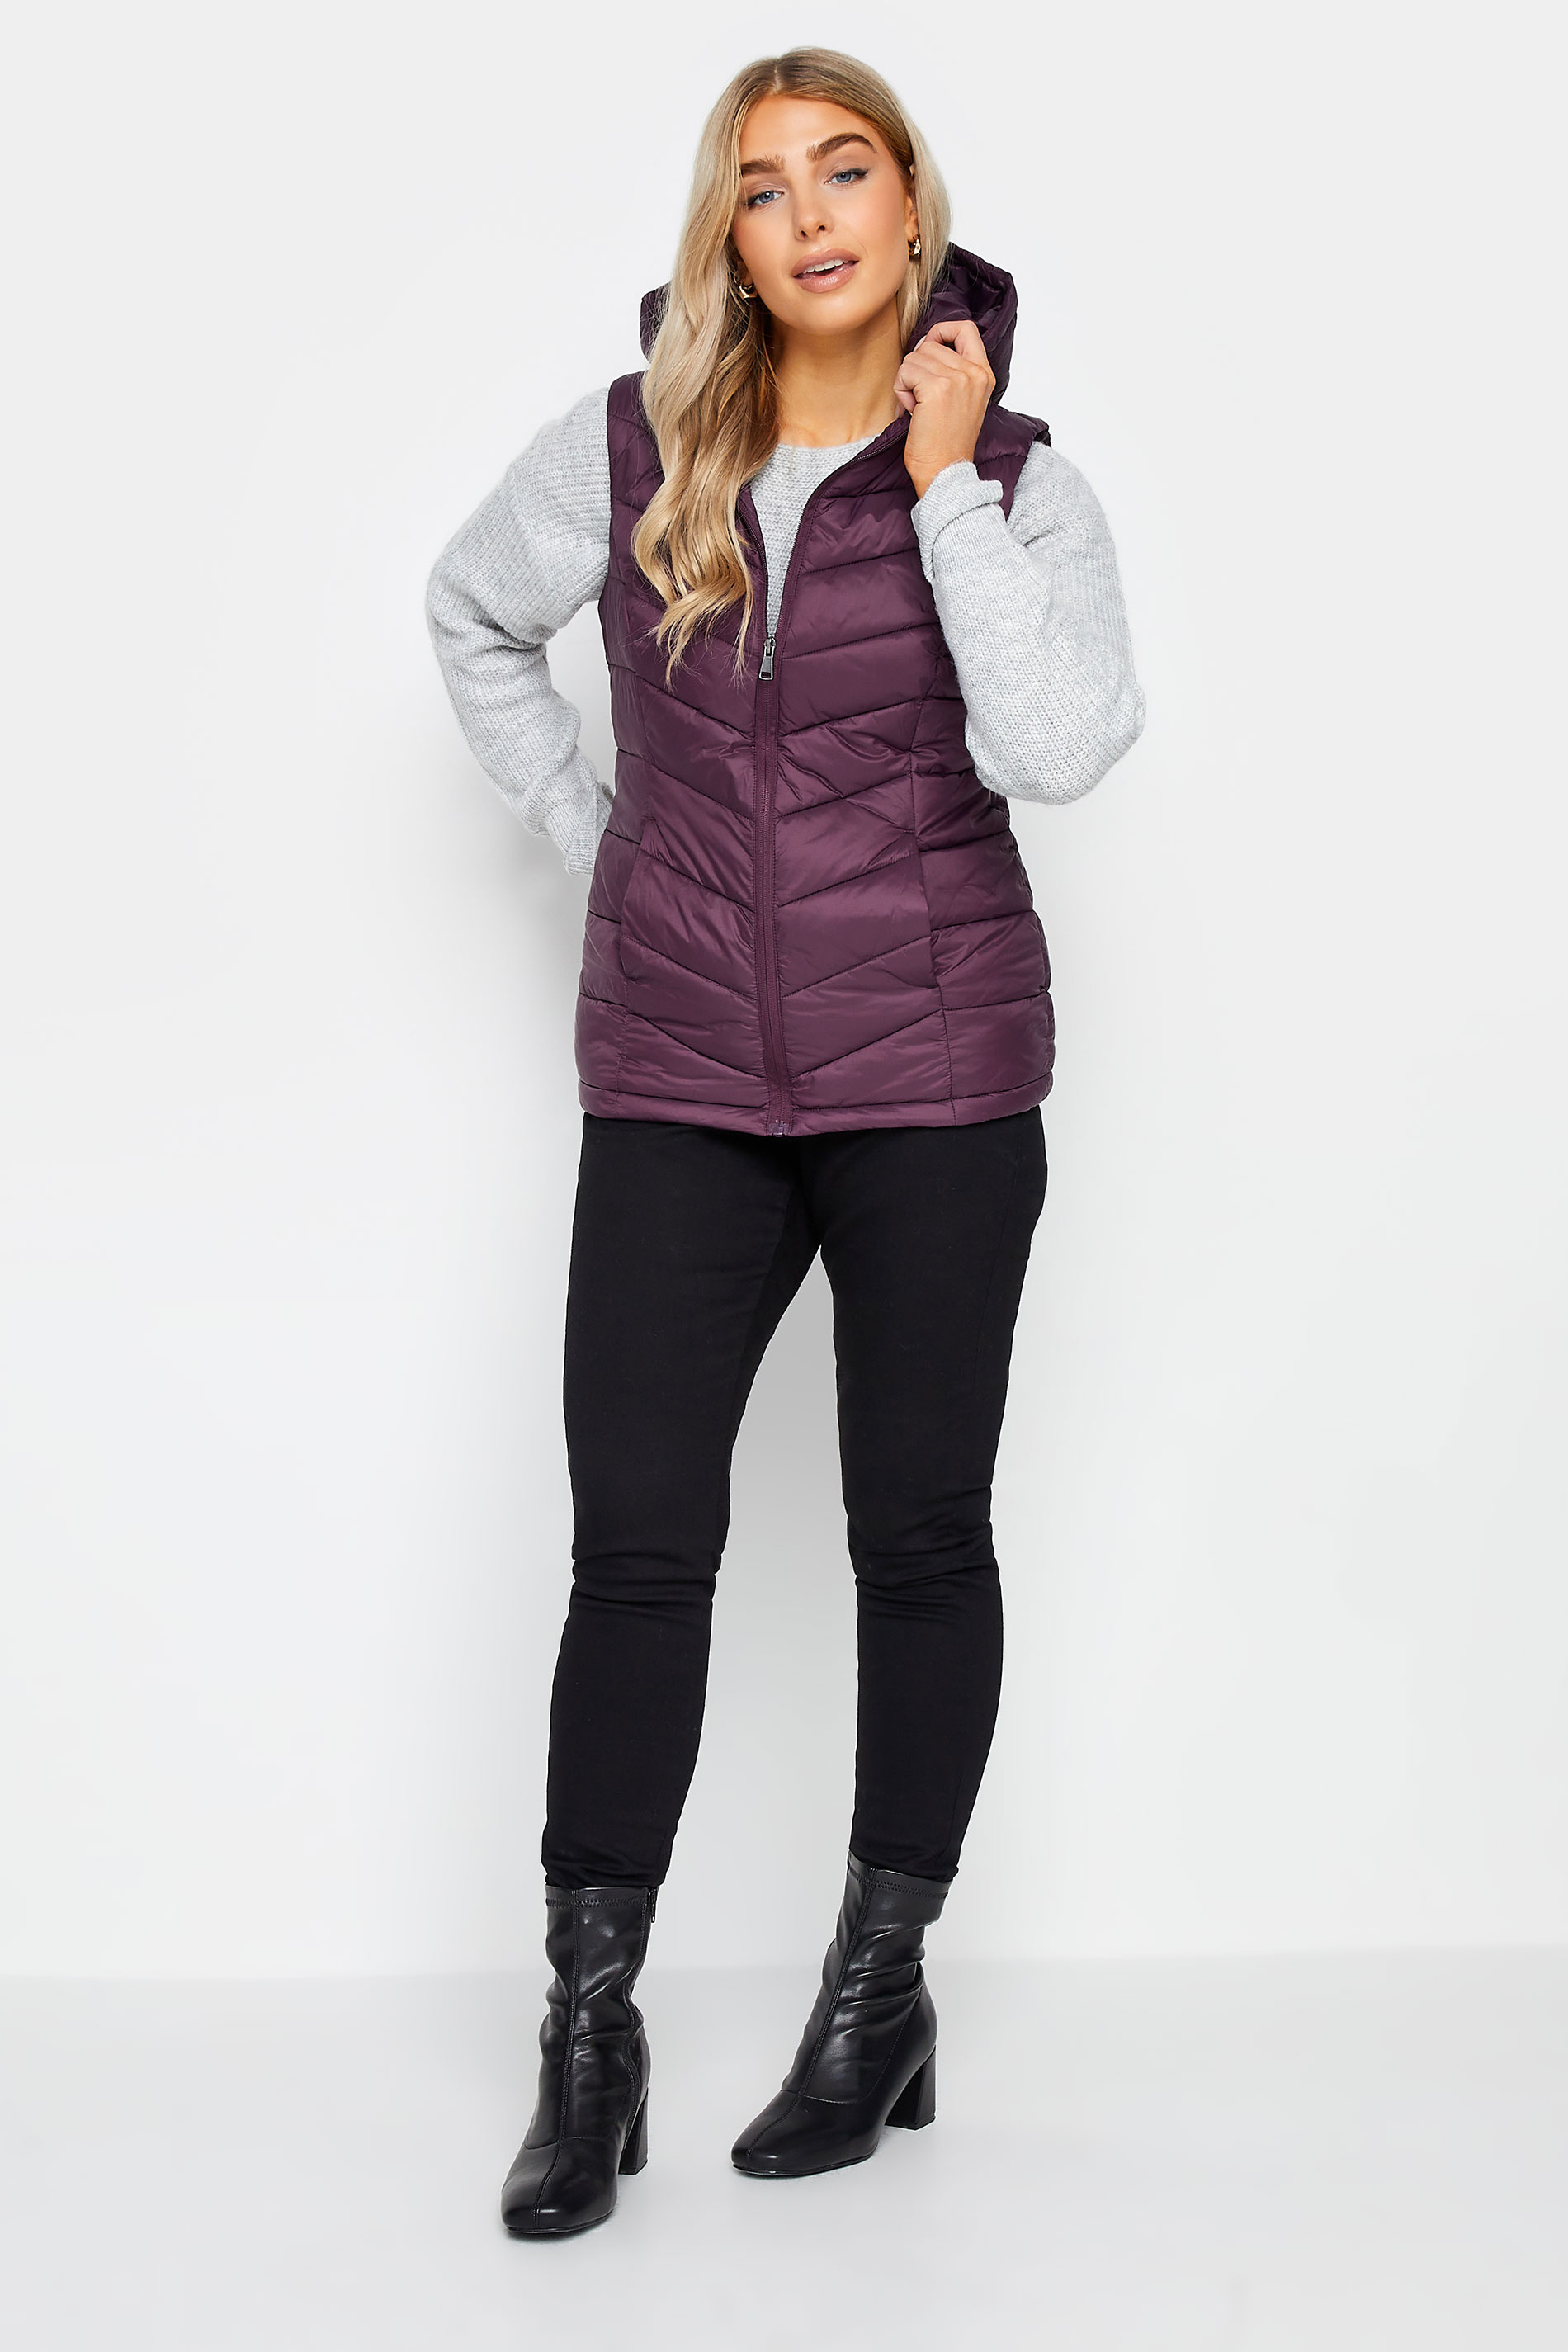 M&Co Purple Quilted Gilet | M&Co 3